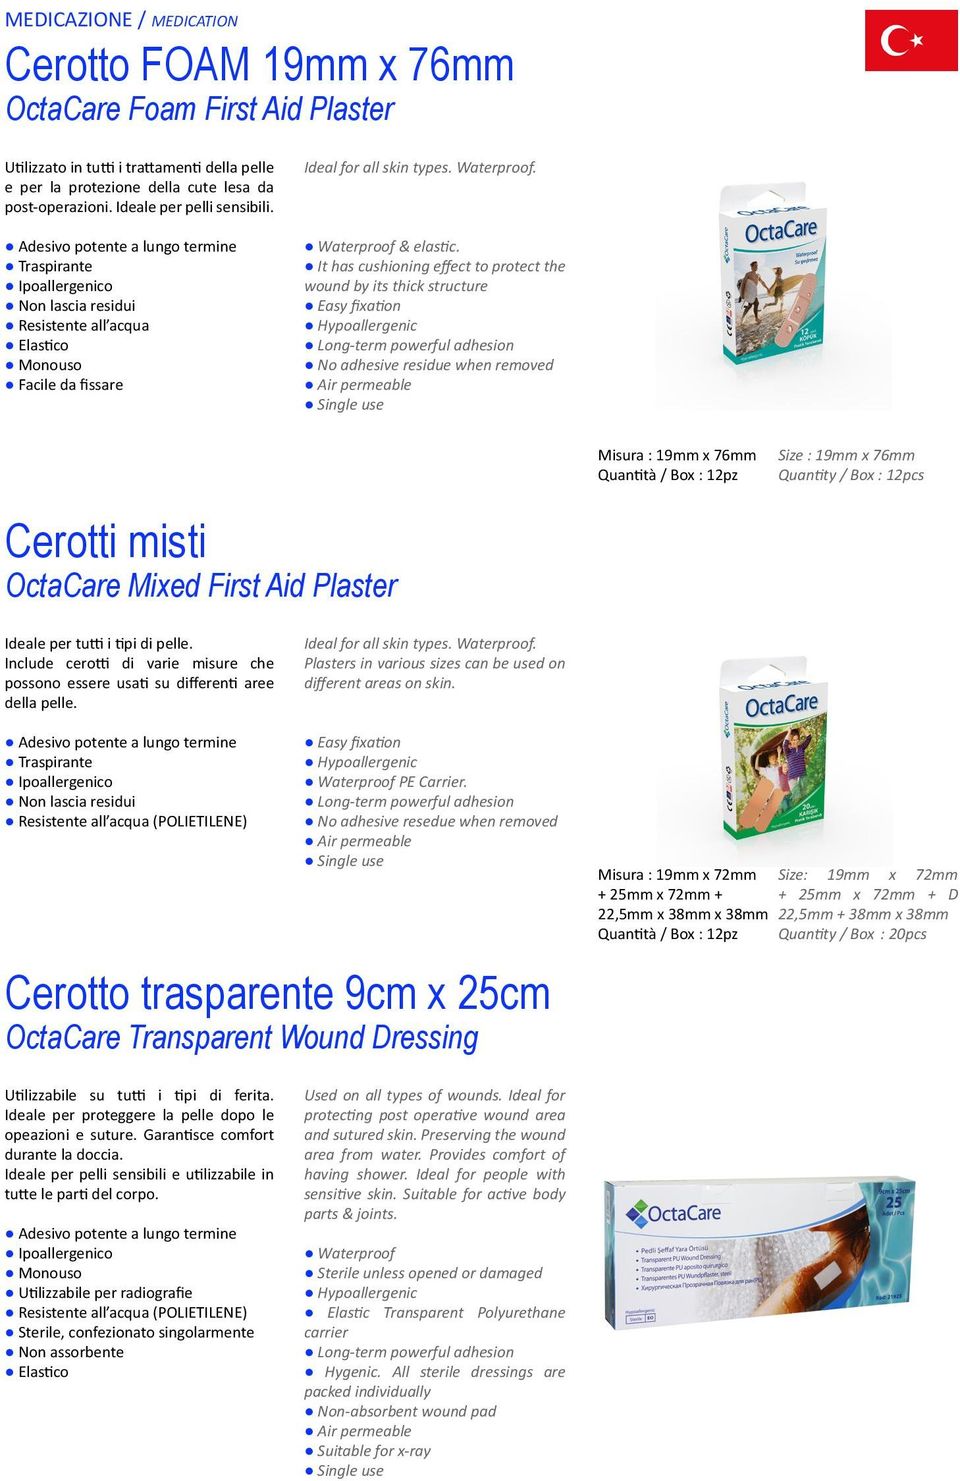 It has cushioning effect to protect the wound by its thick structure No adhesive residue when removed Misura : 19mm x 76mm Quantità / Box : 12pz Size : 19mm x 76mm Quantity / Box : 12pcs Cerotti